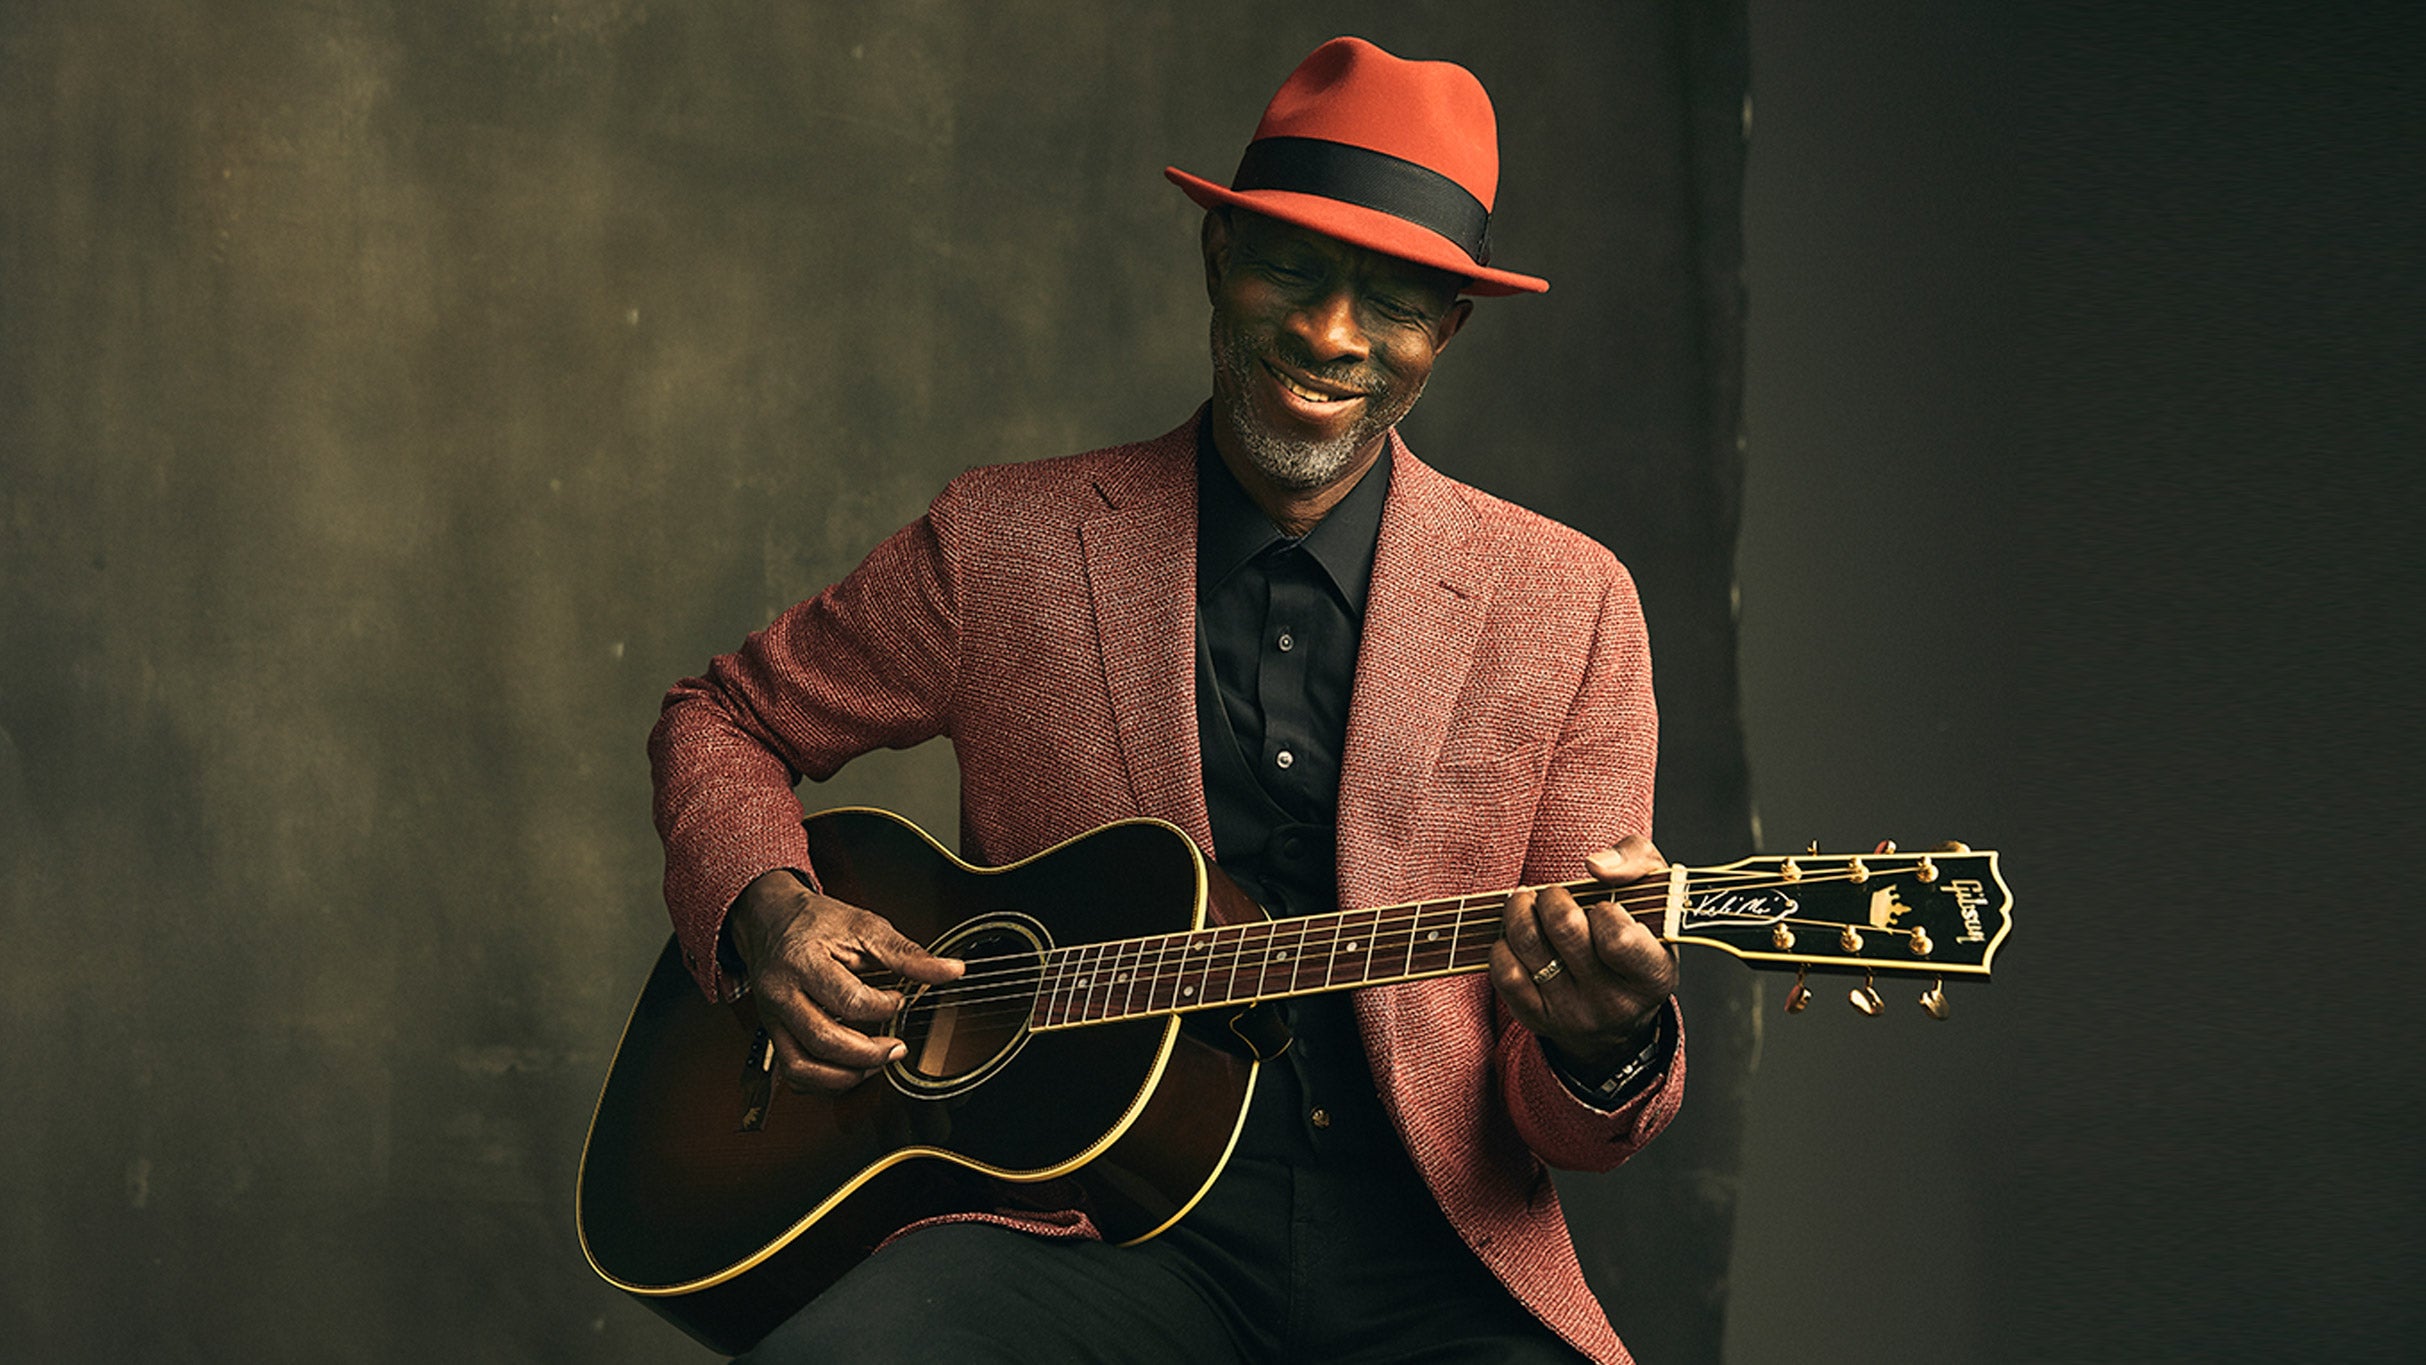 Keb' Mo' & Shawn Colvin with Special Guest Paul Kelly